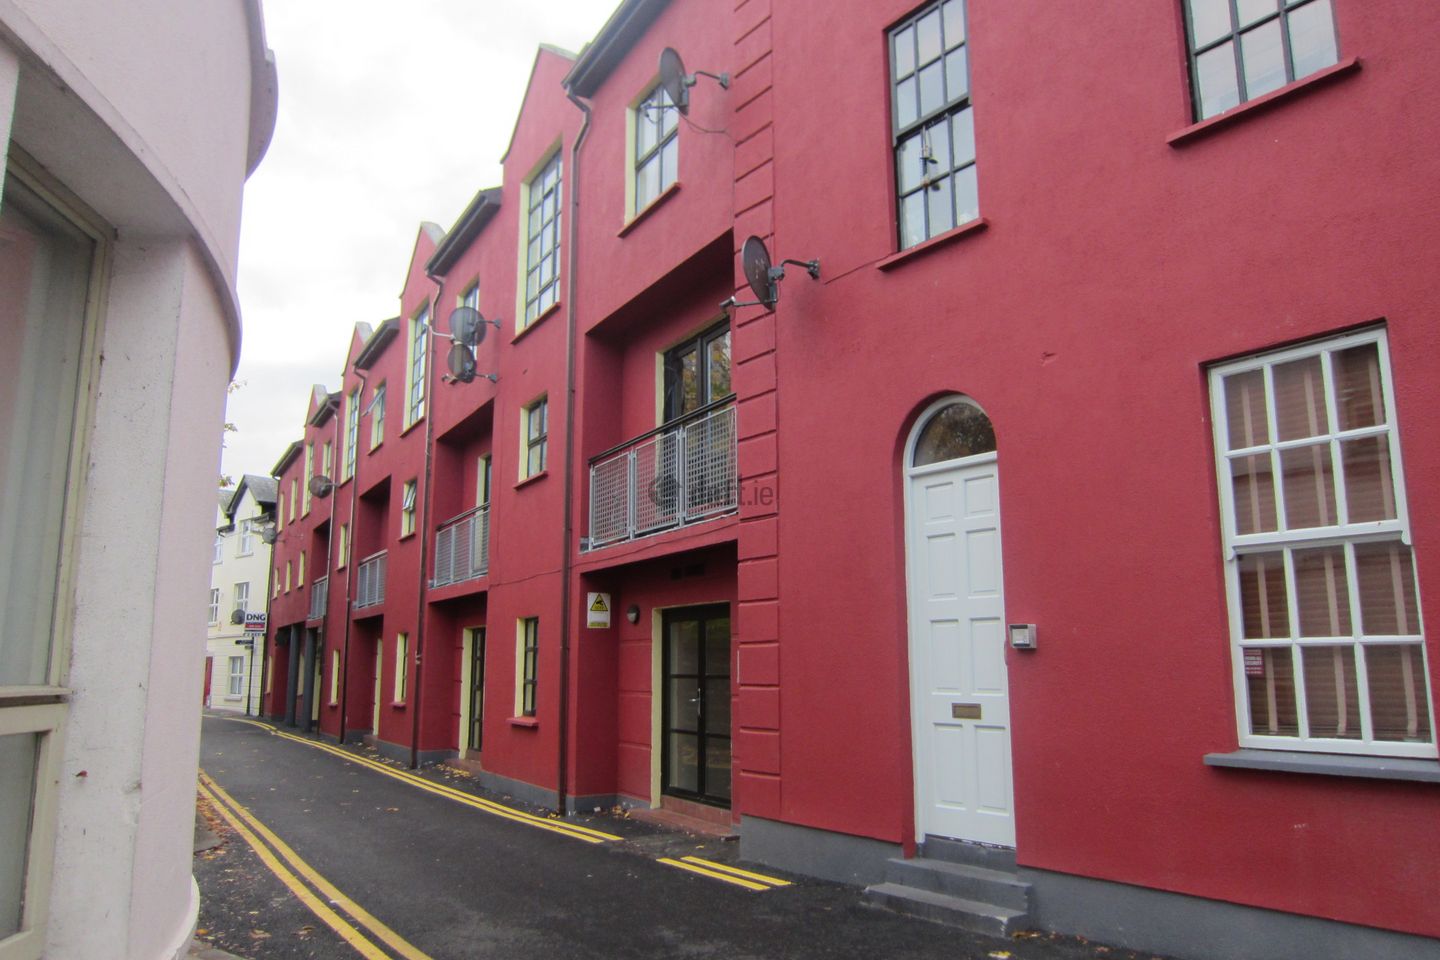 Apt 20 Fry Court, Excise St, Athlone, Co. Westmeath